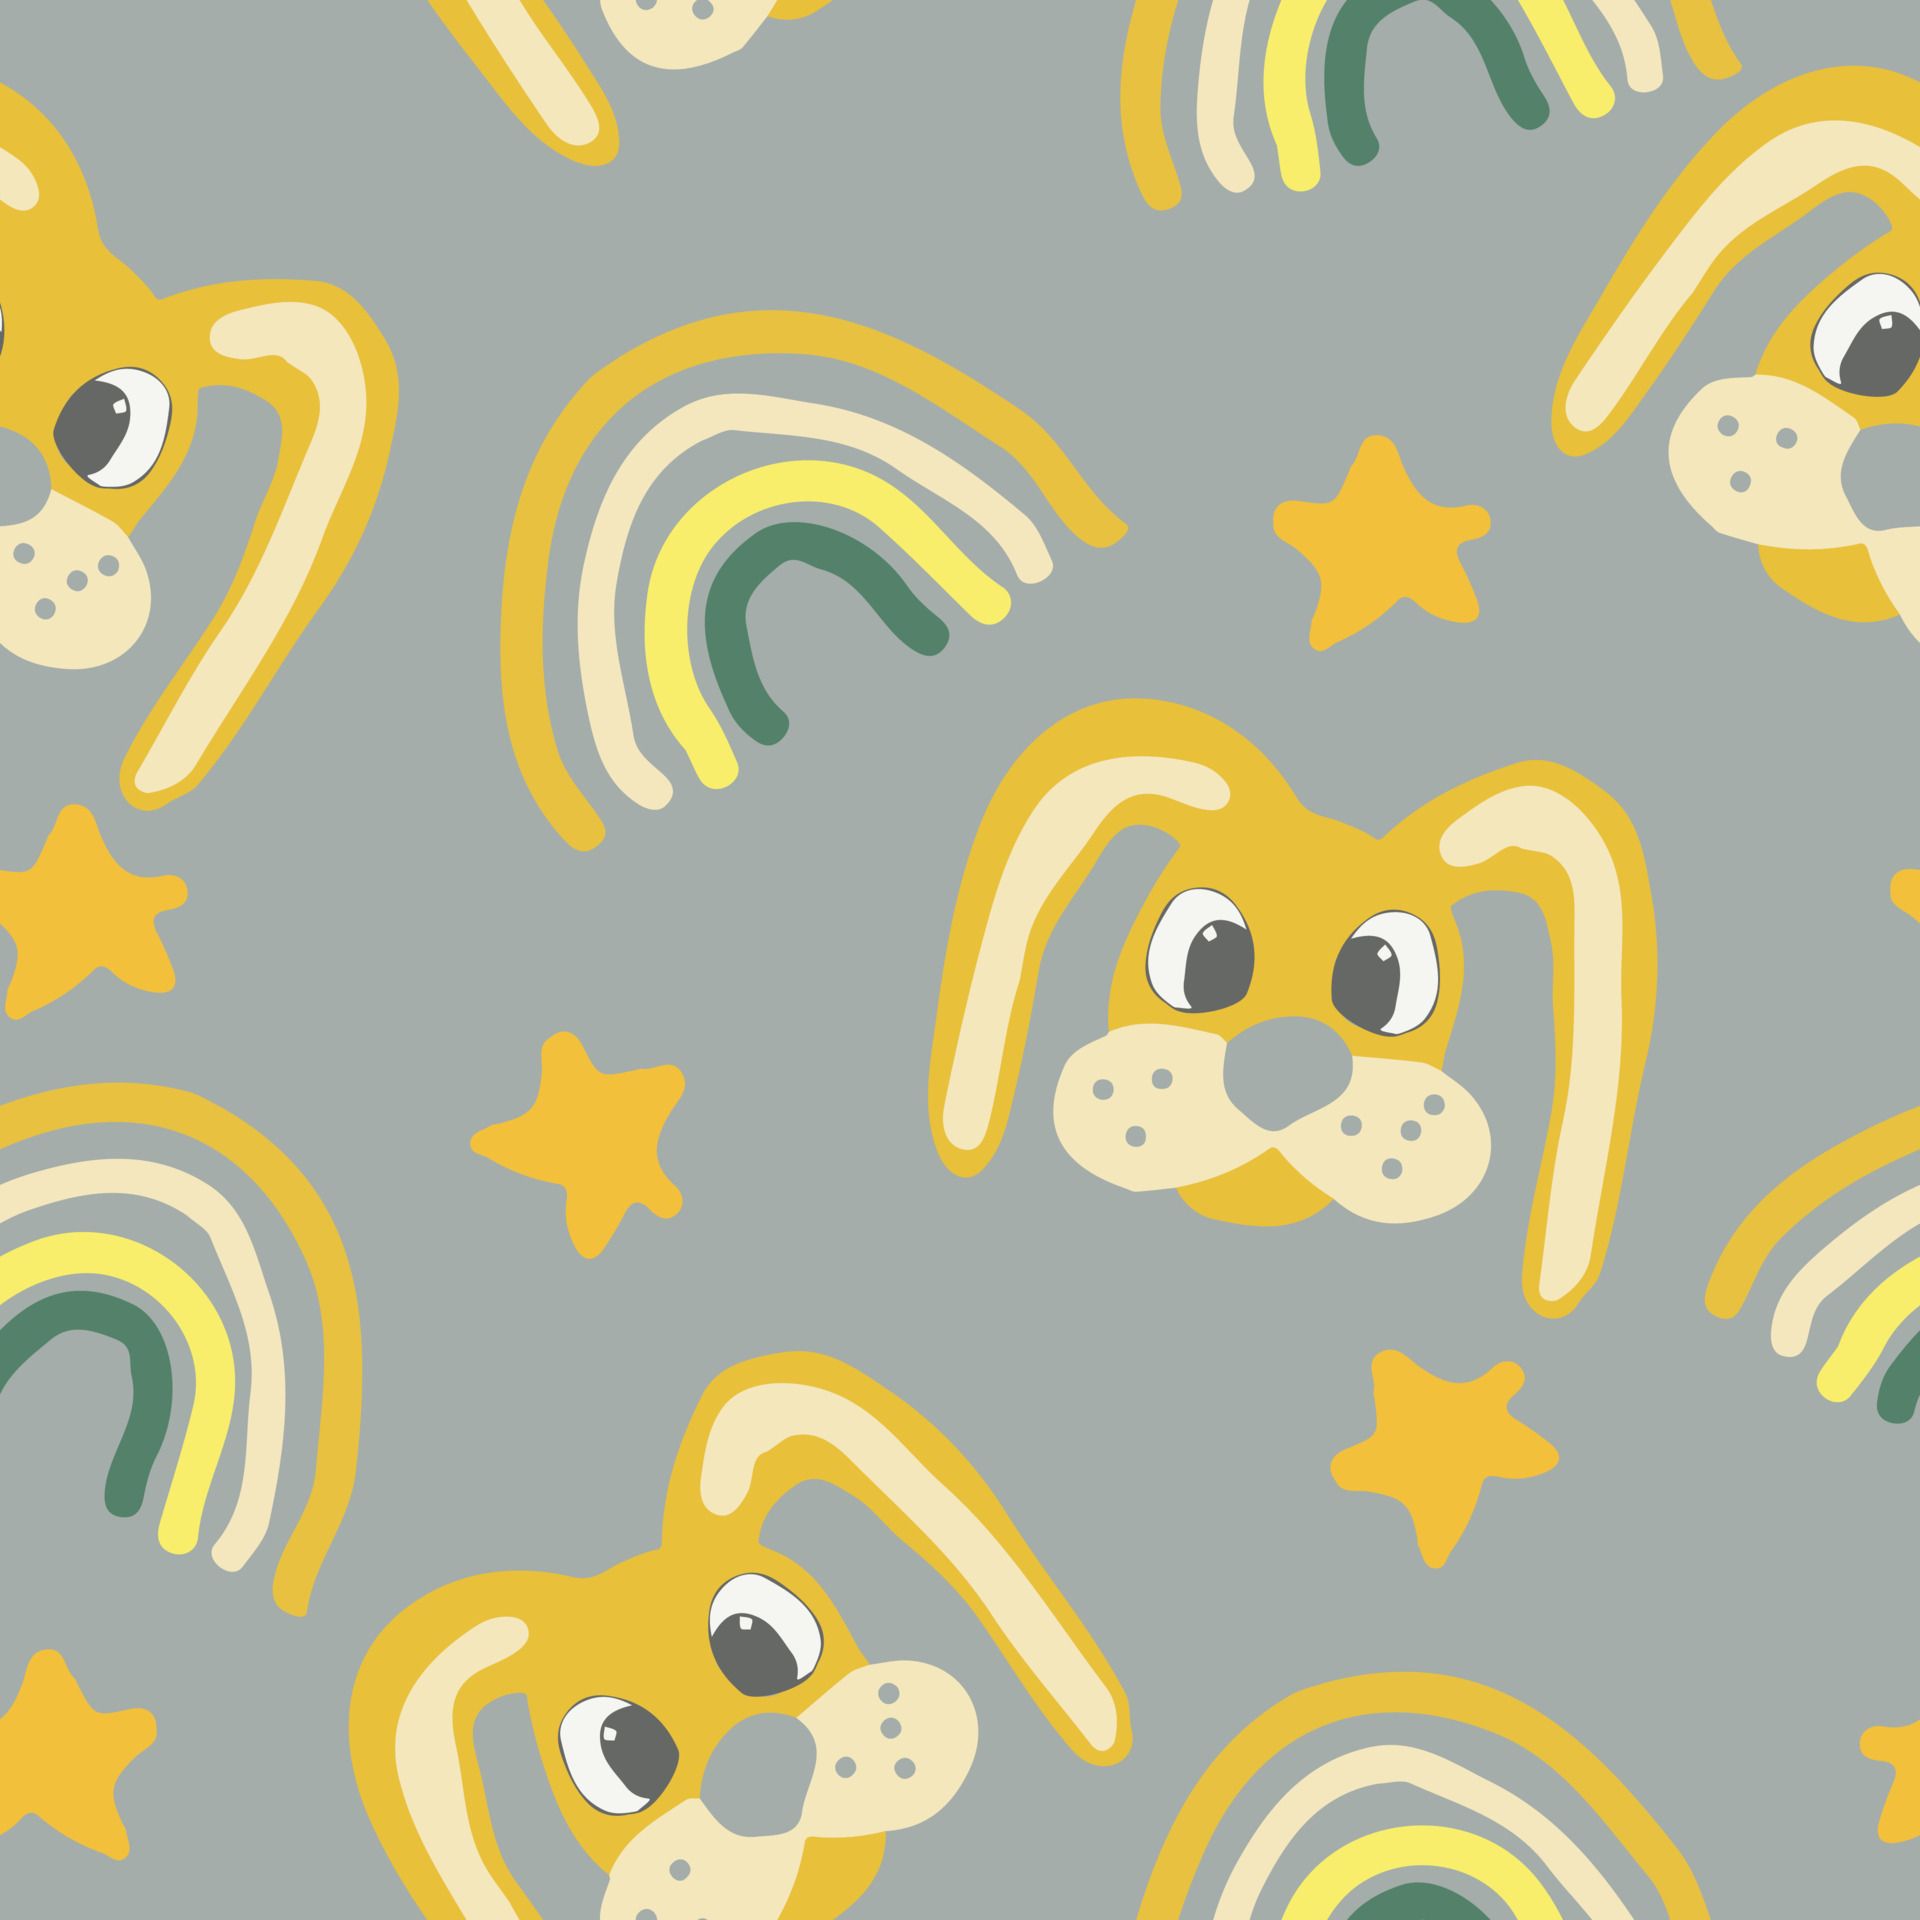 A pattern with yellow dogs, green and yellow rainbows, and yellow stars on a grey background - Easter